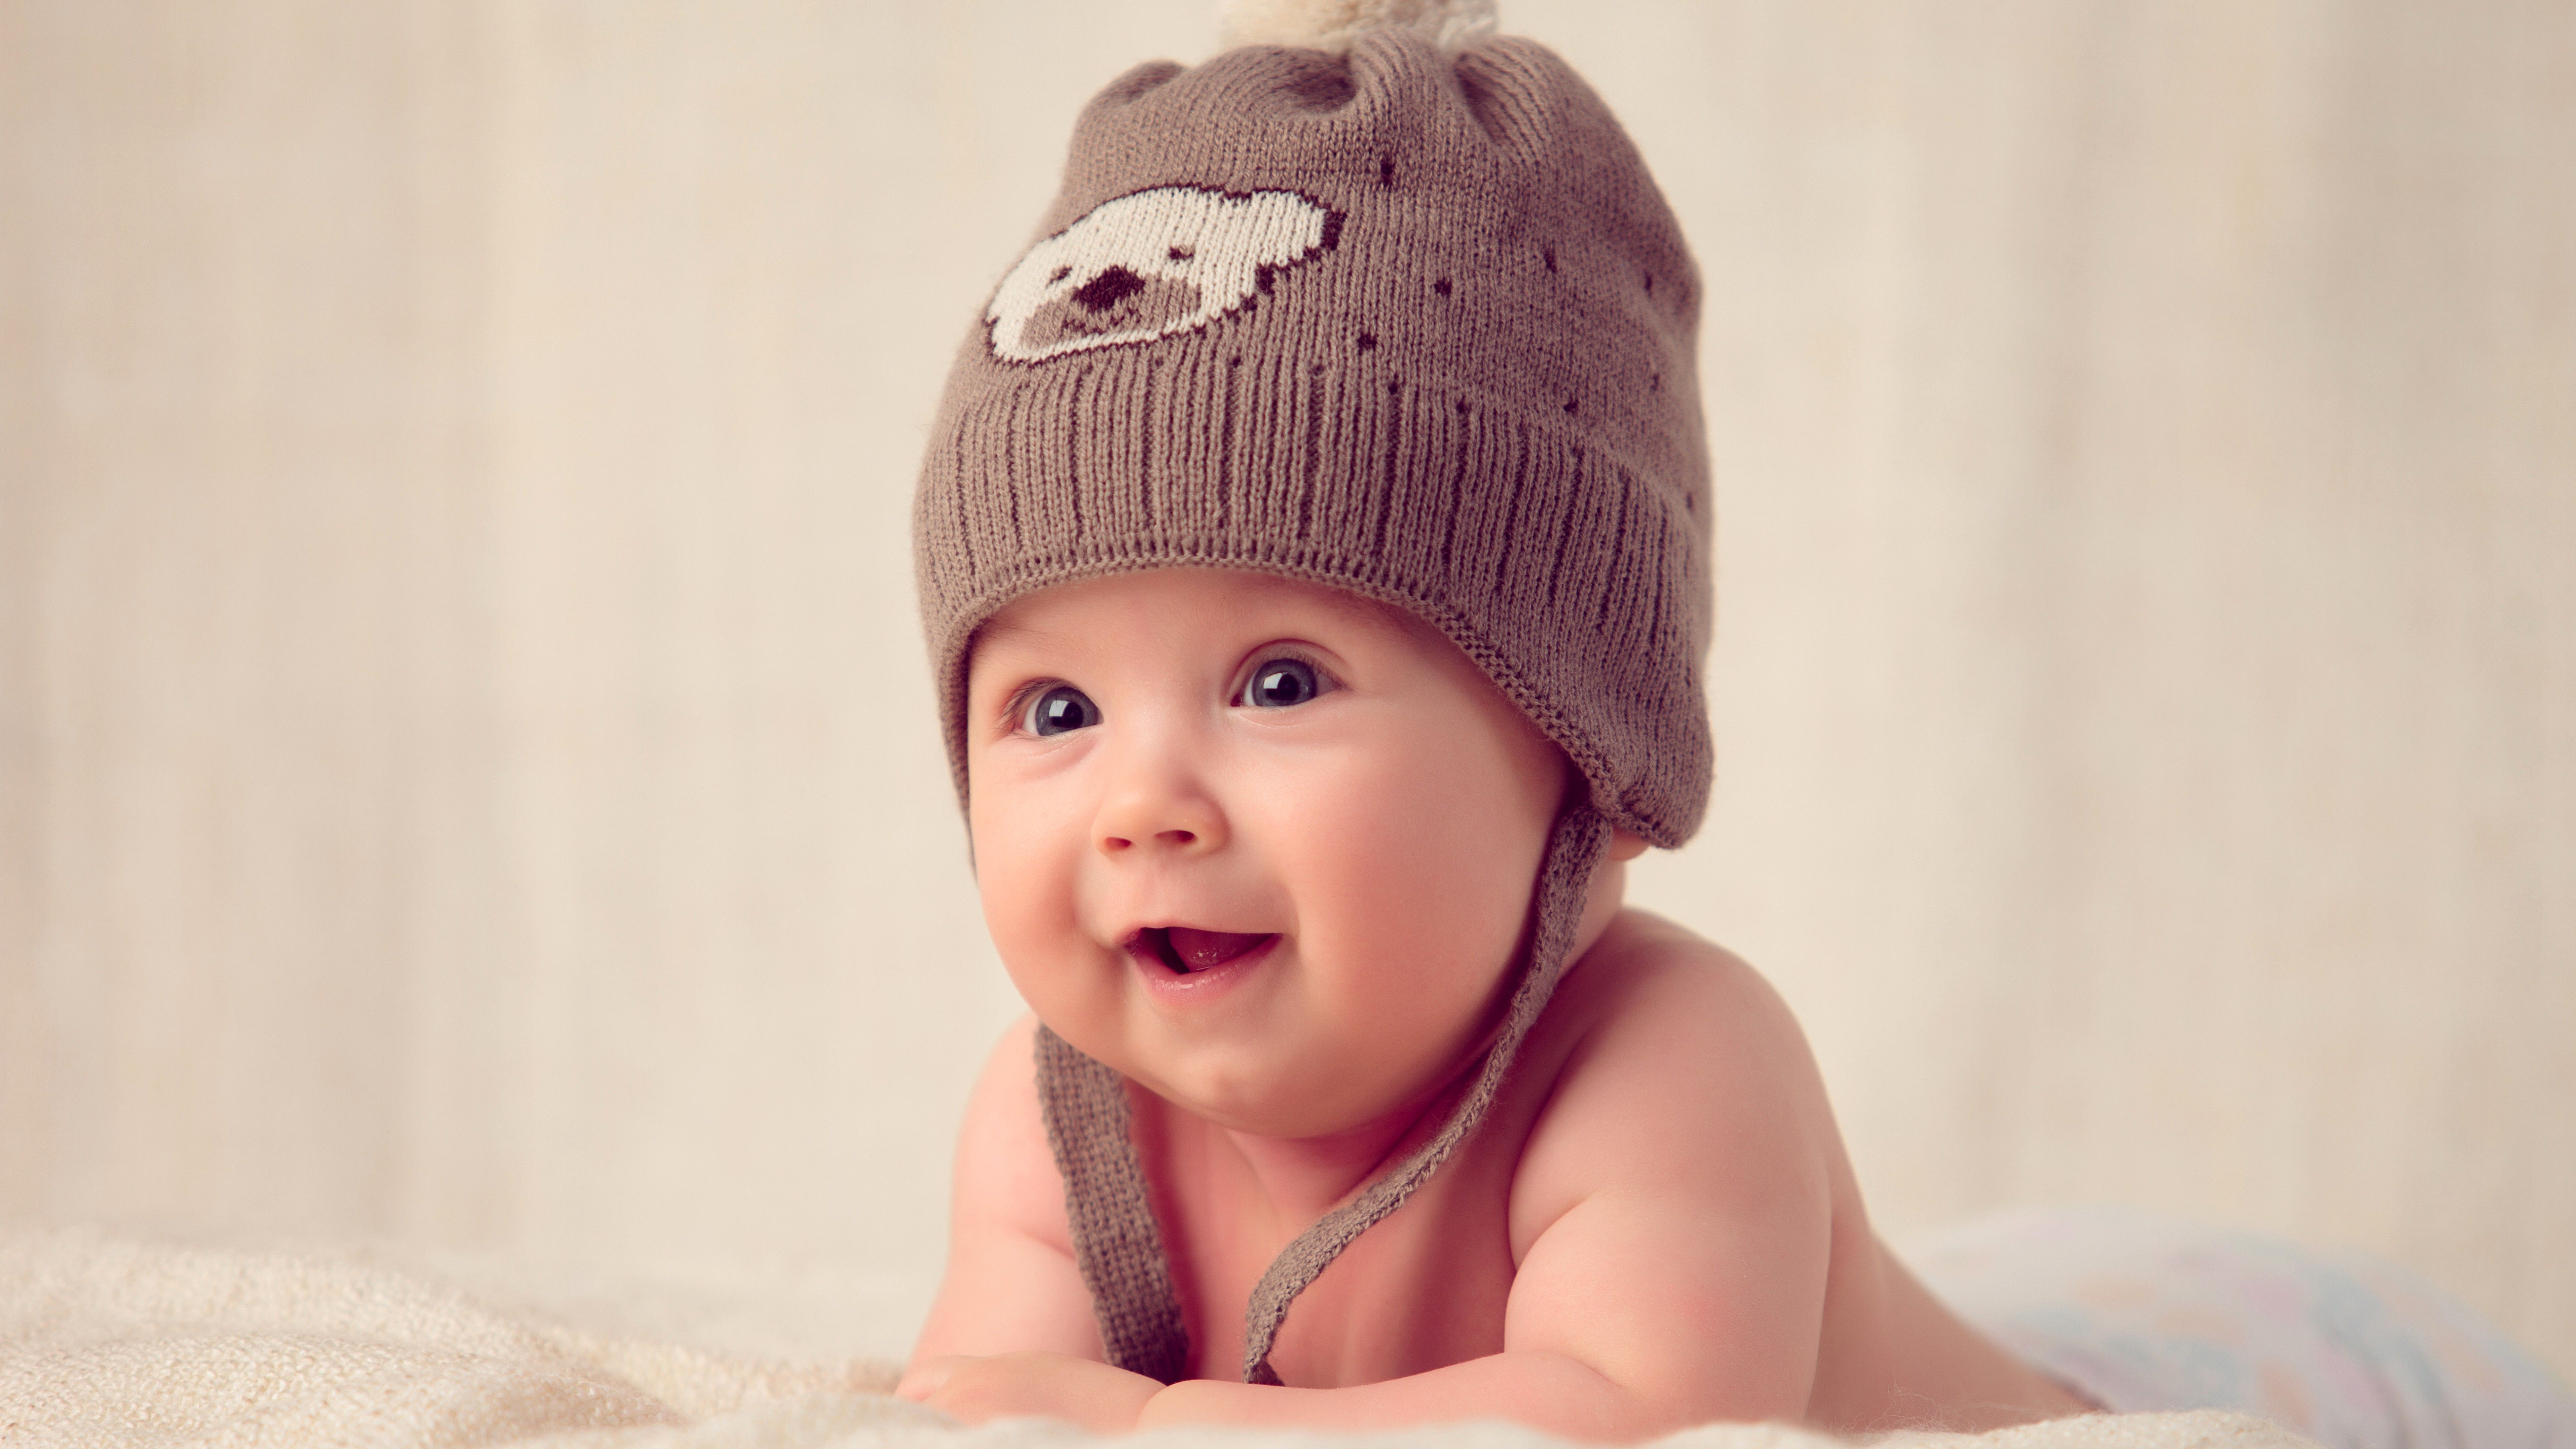 Cute Baby Wallpaper. Cute Babies Picture. Cute Baby Girl Photo